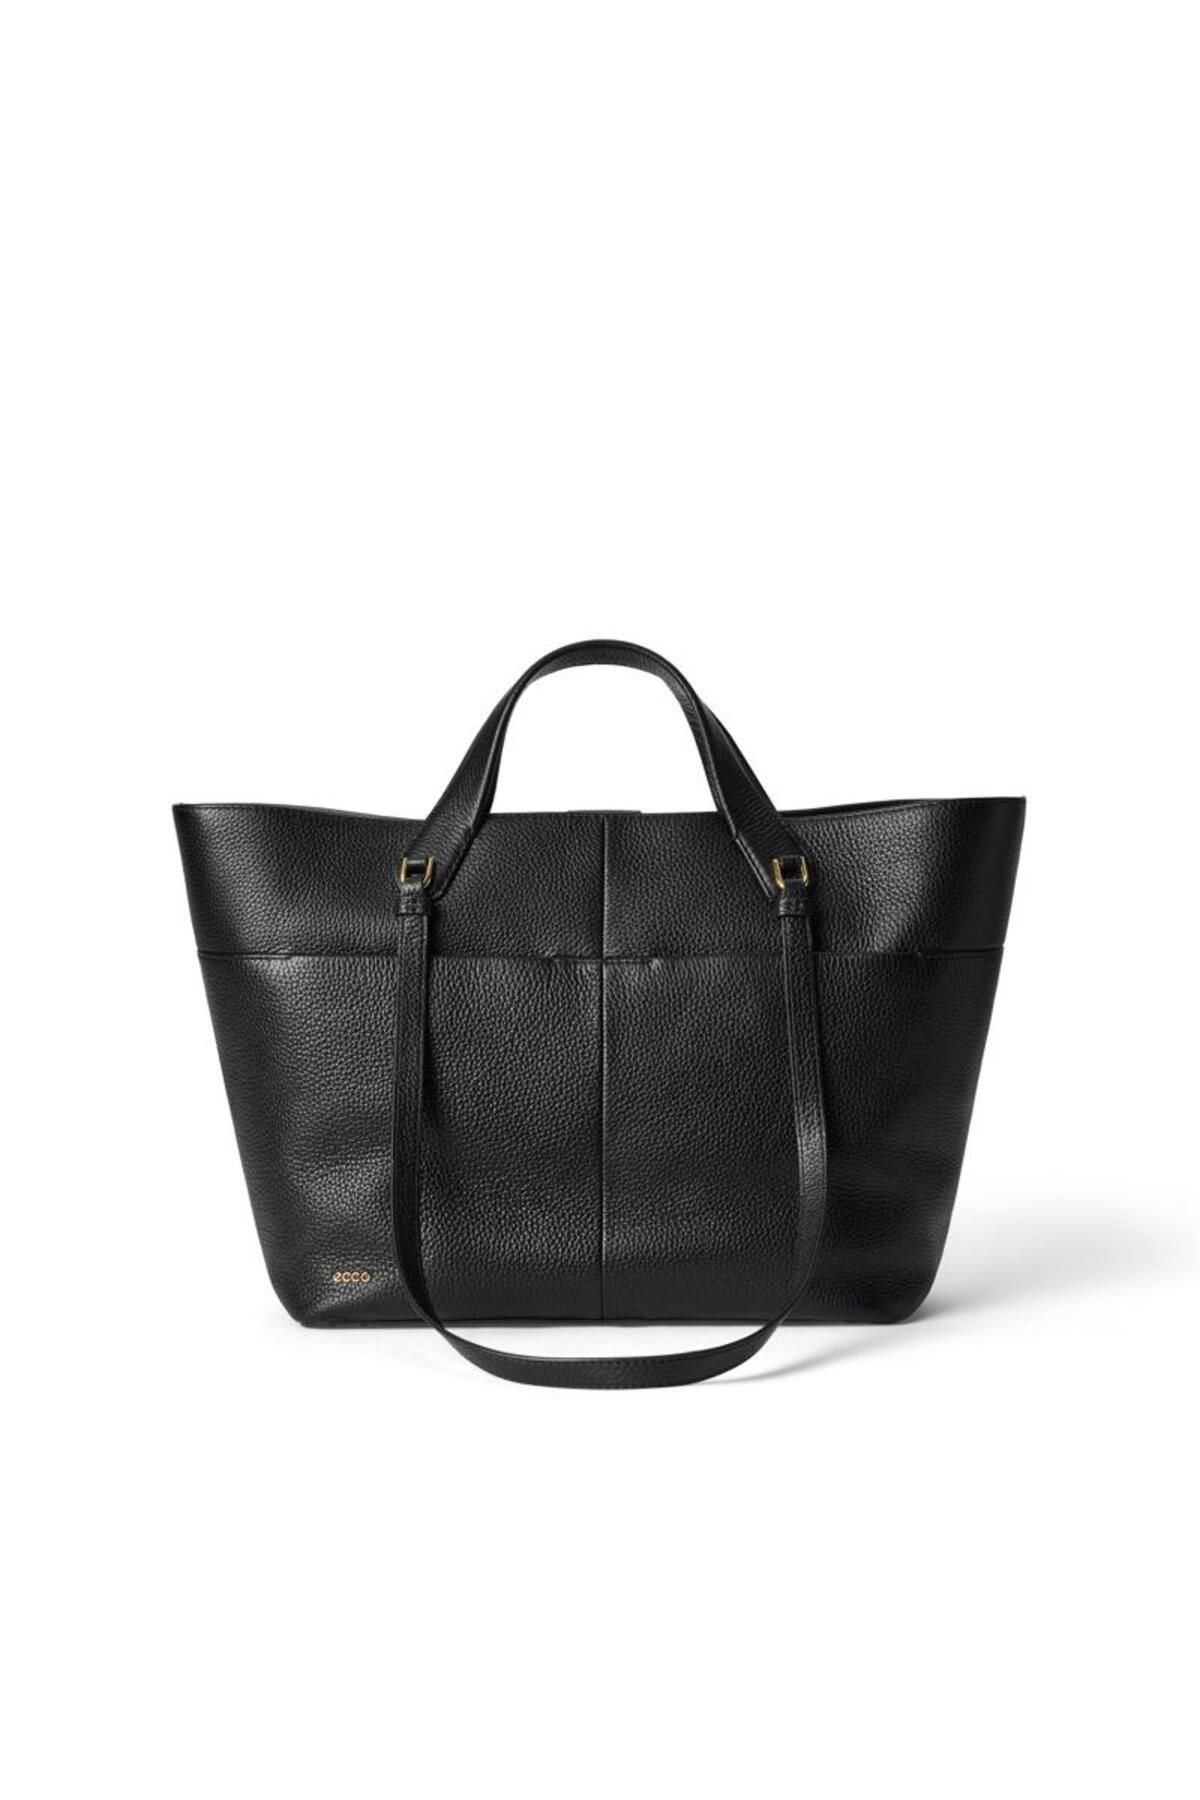 Ecco Tote M Pebbled Leather Bag